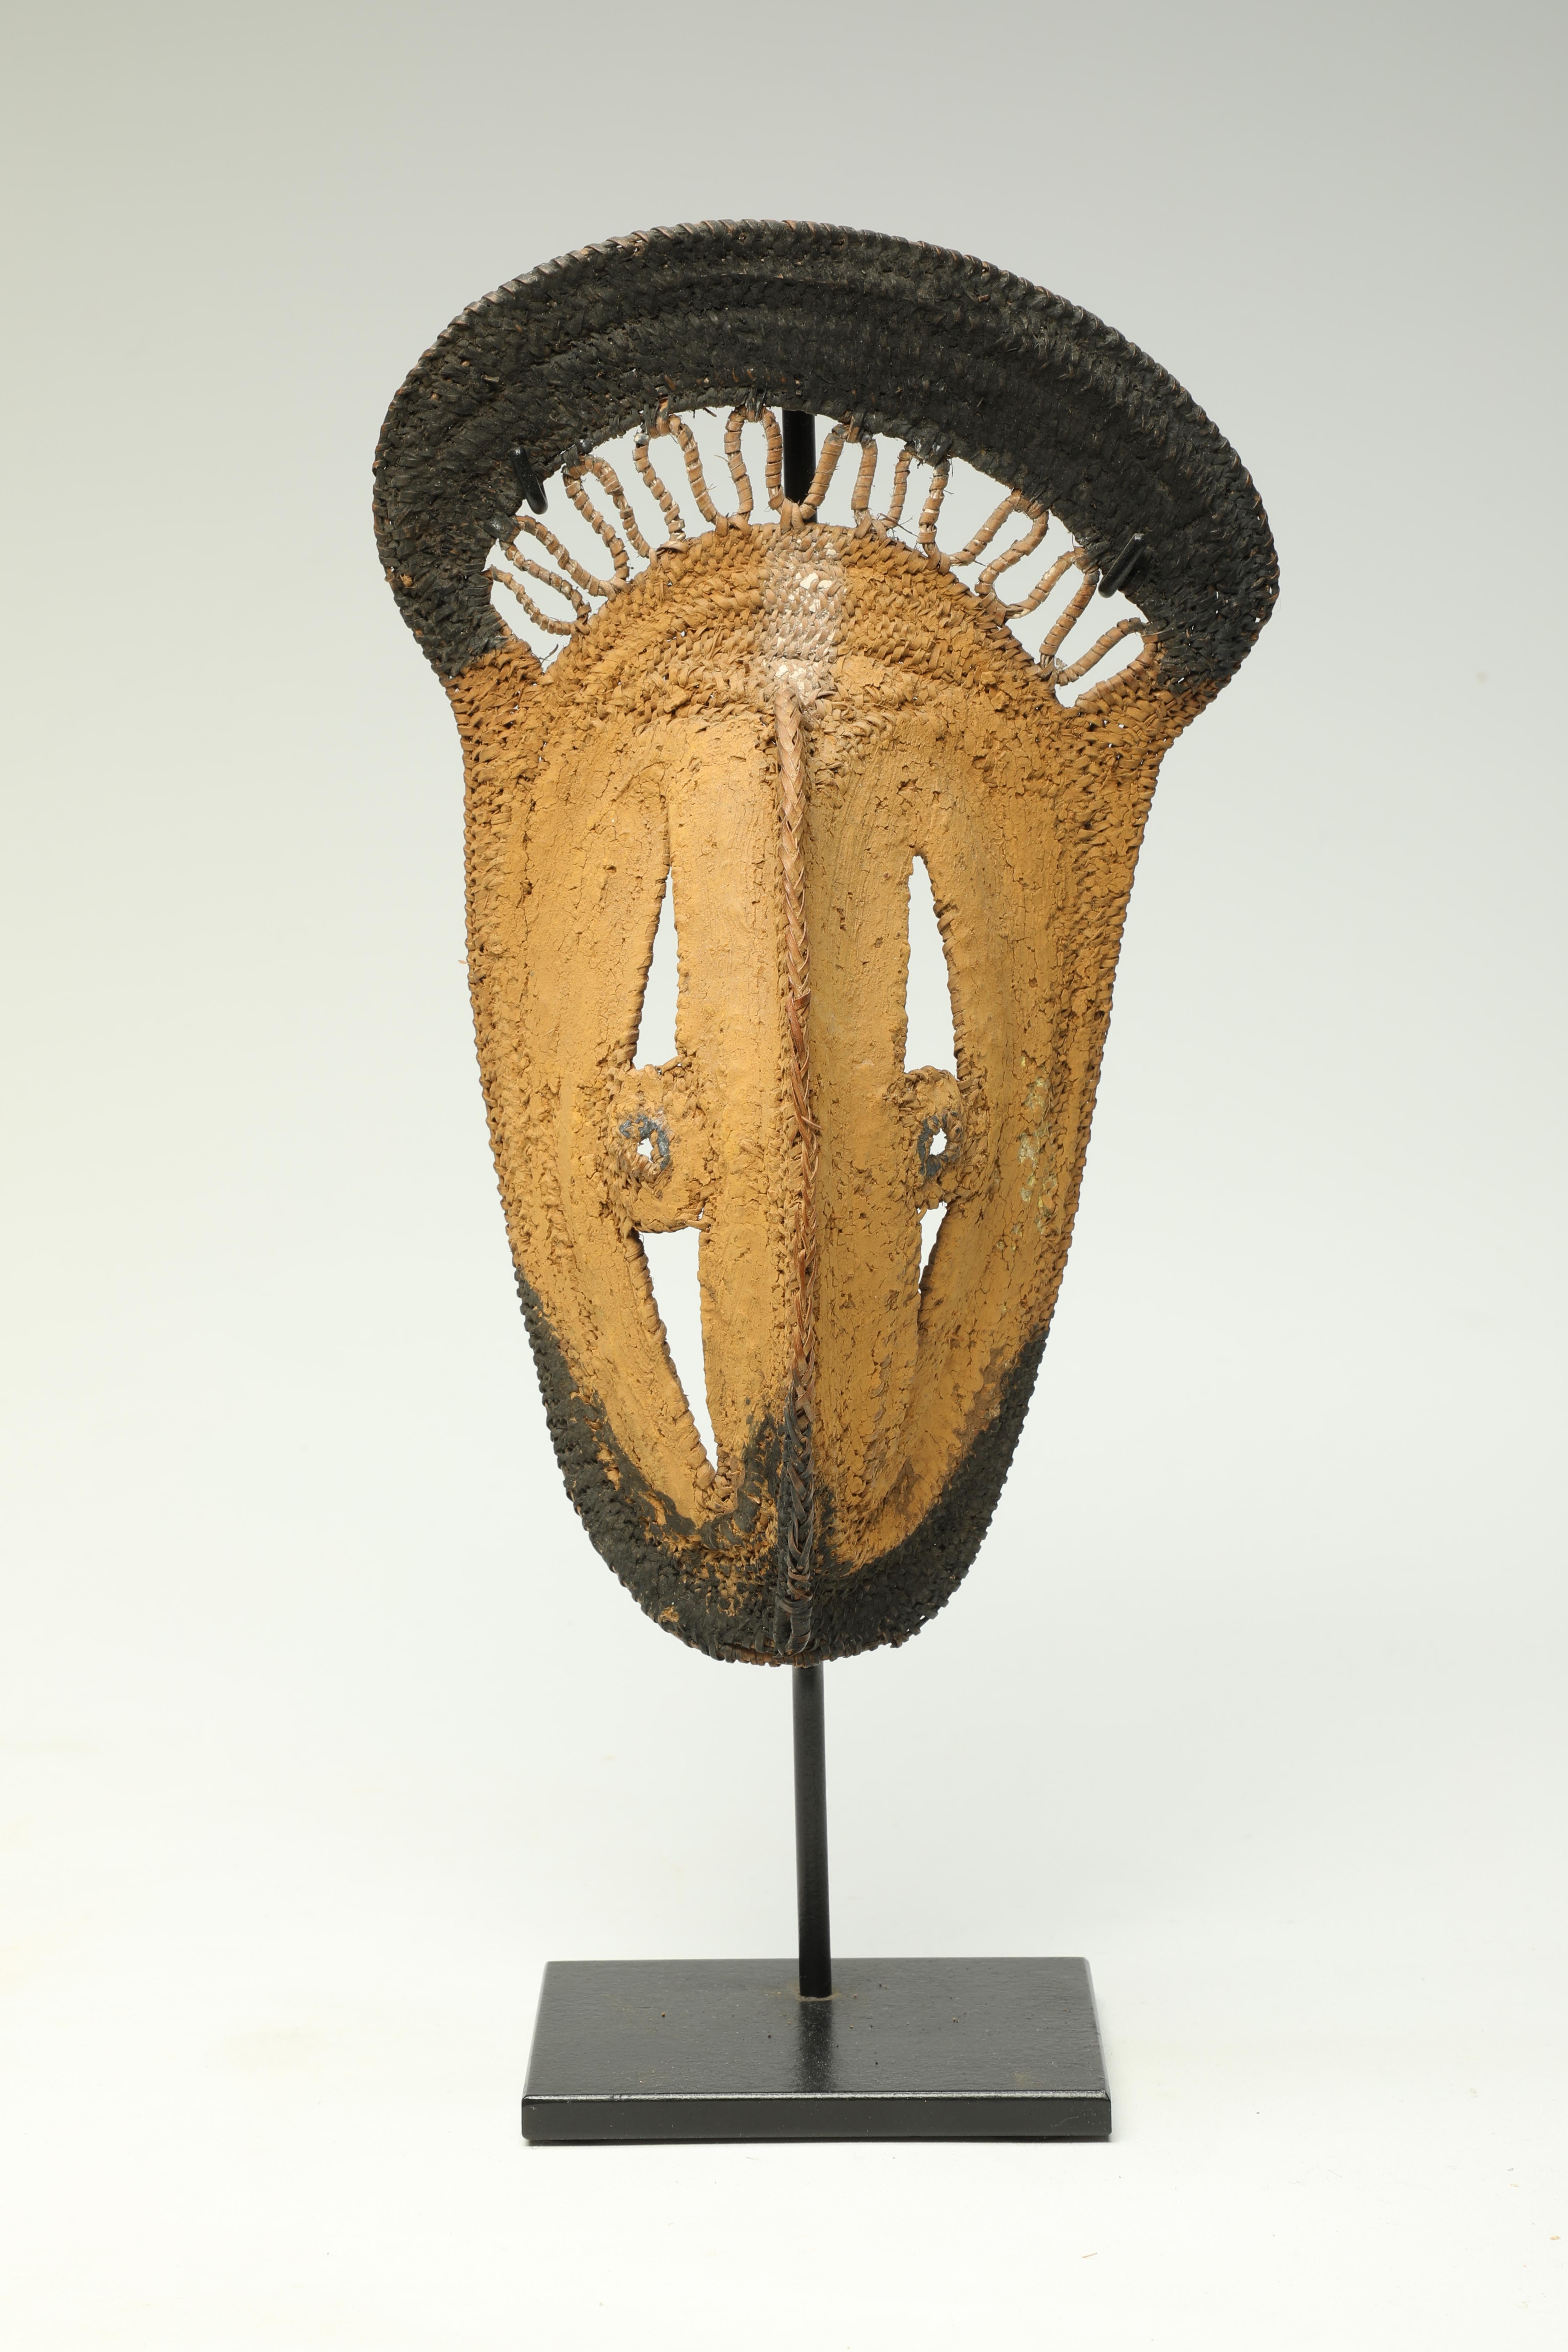 Early Papua New Guinea Sepik River area tightly woven raffia yam mask with areas of heavy yellow and black pigments. In profile small bird beak form at bottom.
Mask is 8 1/2 inches high, on custom metal base total height 11 inches.

